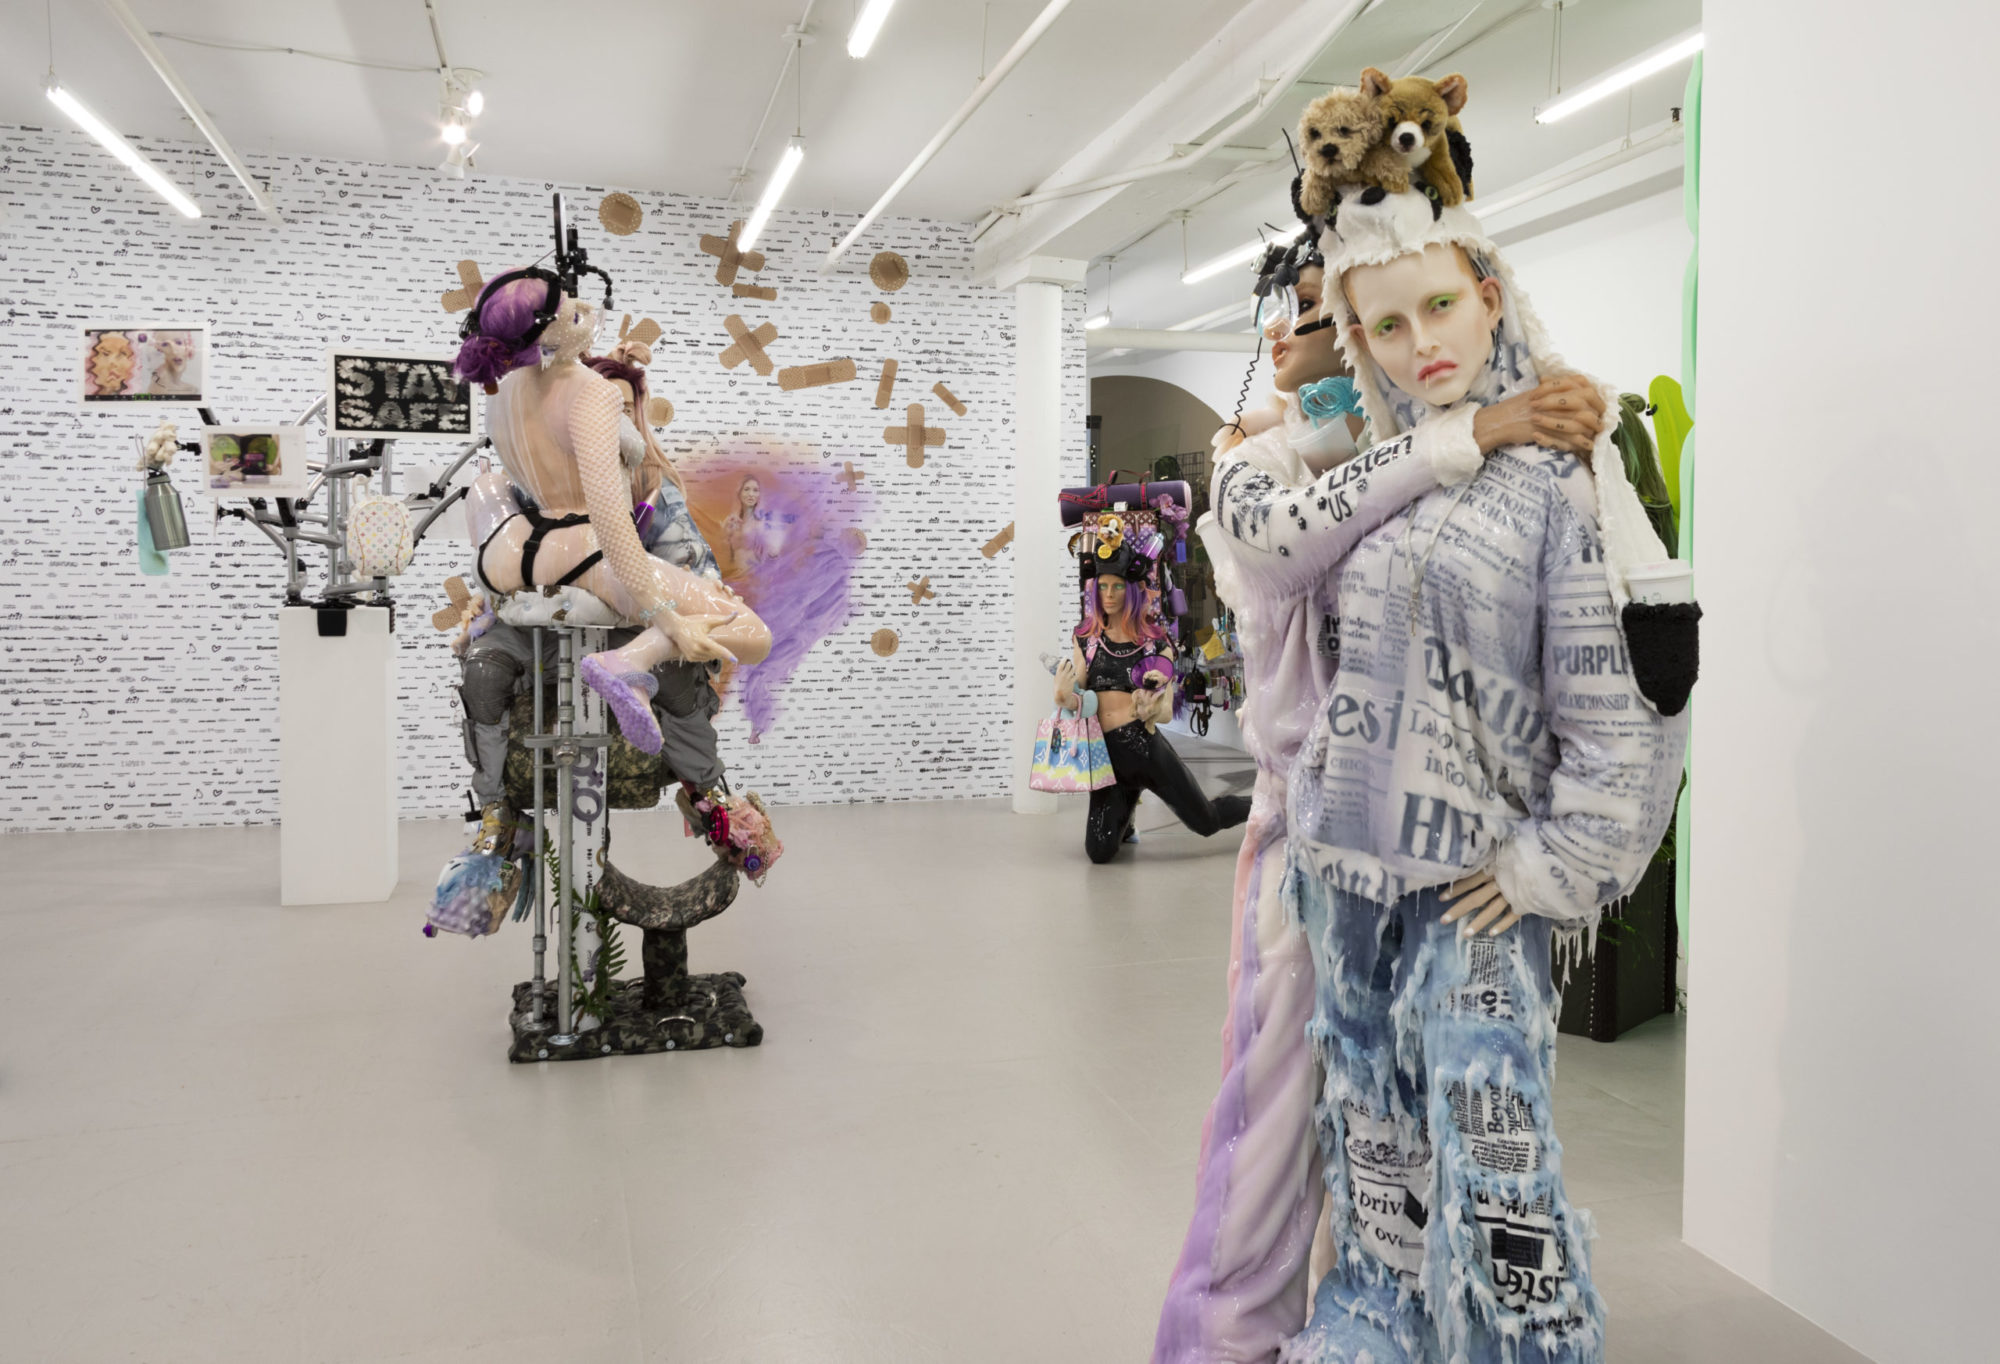 Three groups of silicone figures stand in various poses in gallery. On the left stand two figures in sexual pose; in back middle of frame kneels figure with huge purple backpack covered in accessories balanced on shoulders; to the right stand two figures, one's arms wrapped around the other, both dripping clear goo